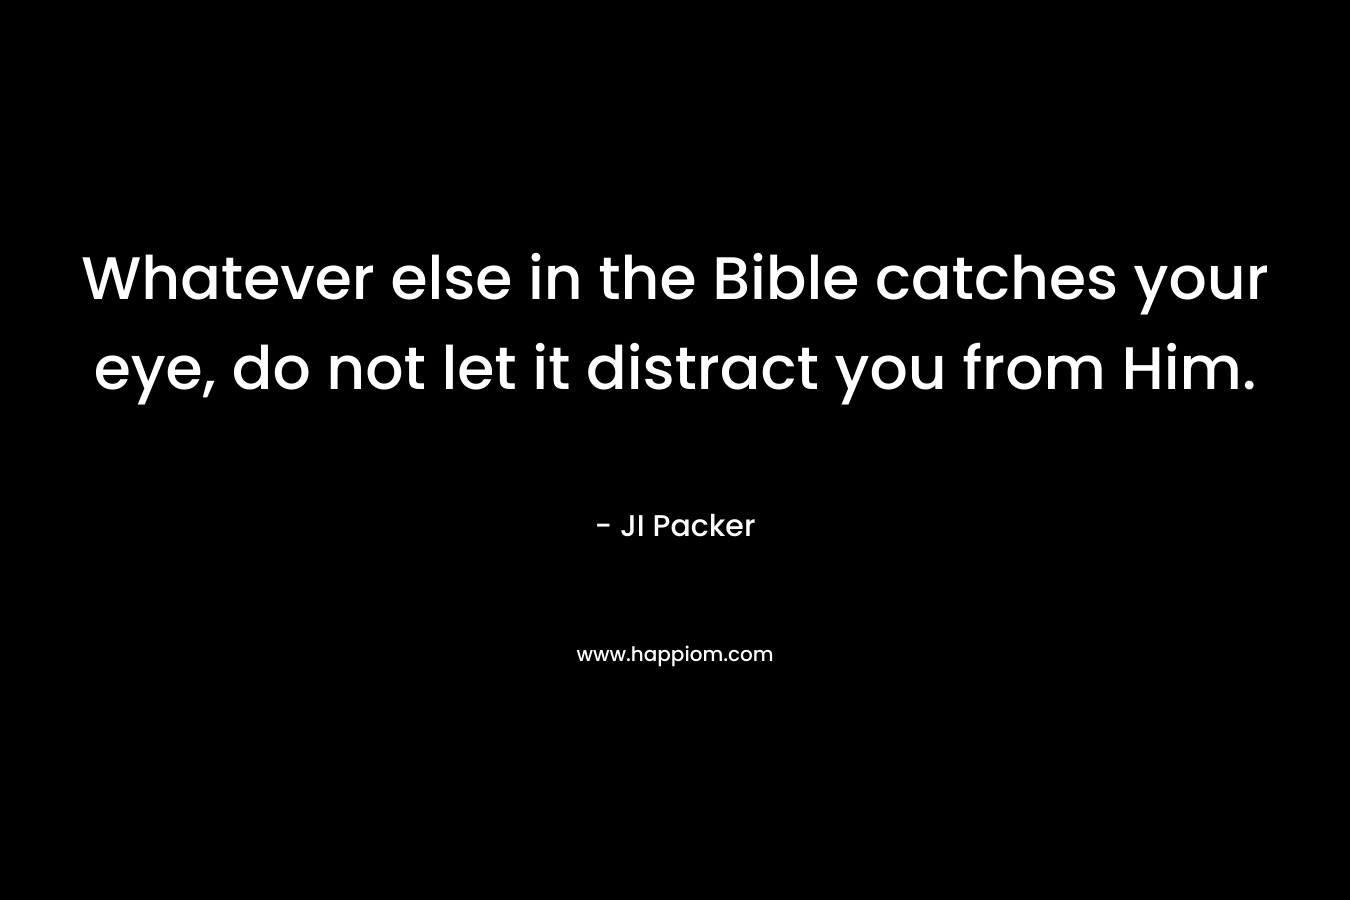 Whatever else in the Bible catches your eye, do not let it distract you from Him.